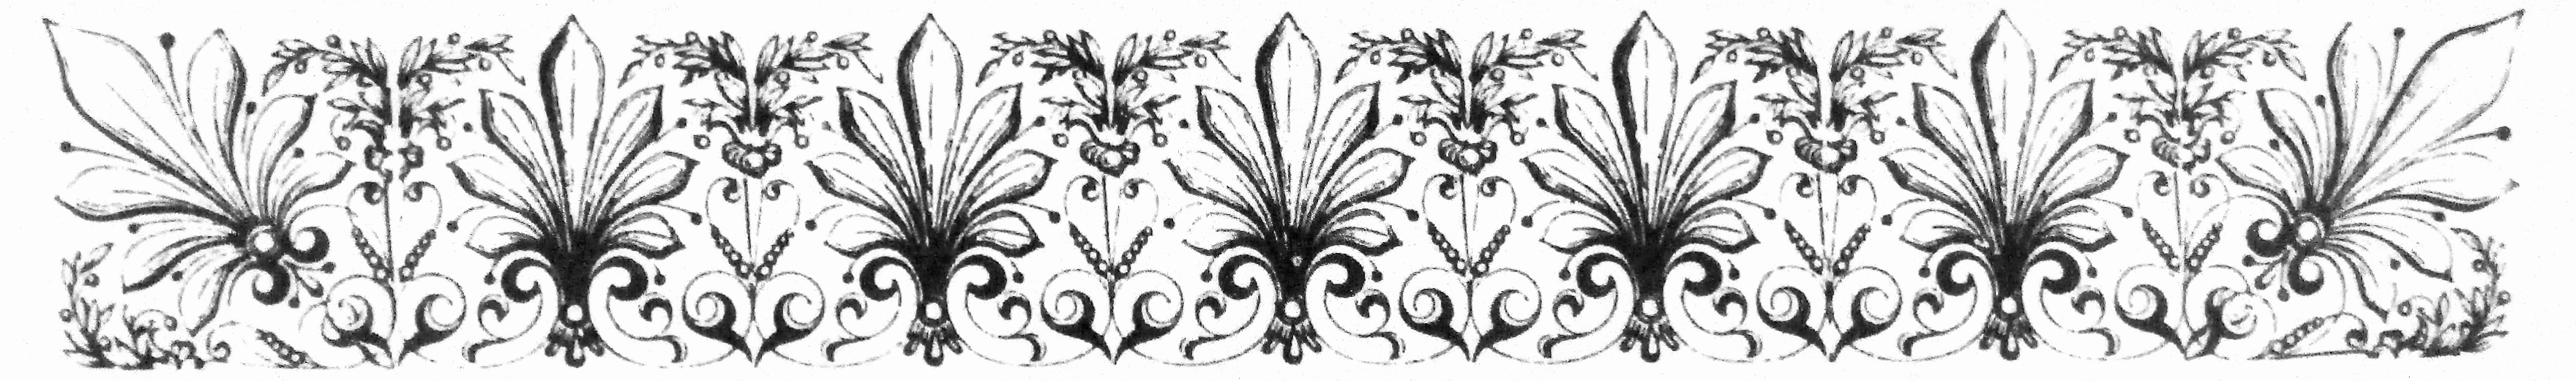 19th century floral engraving